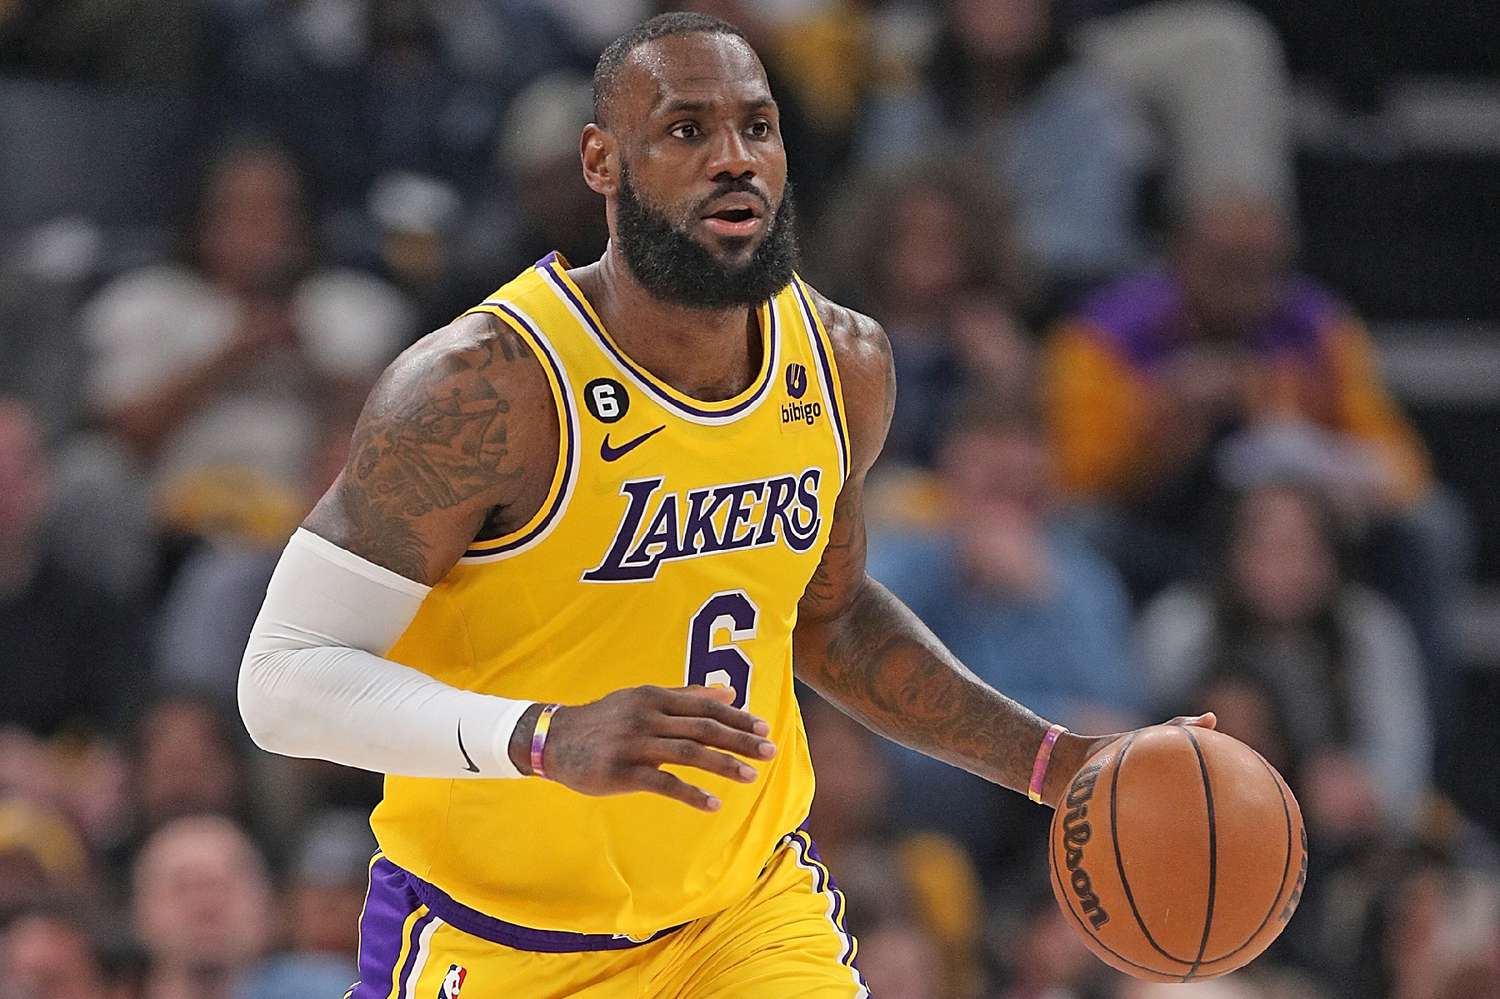 LeBron's Future Hangs in Balance After Lakers Playoff Exit